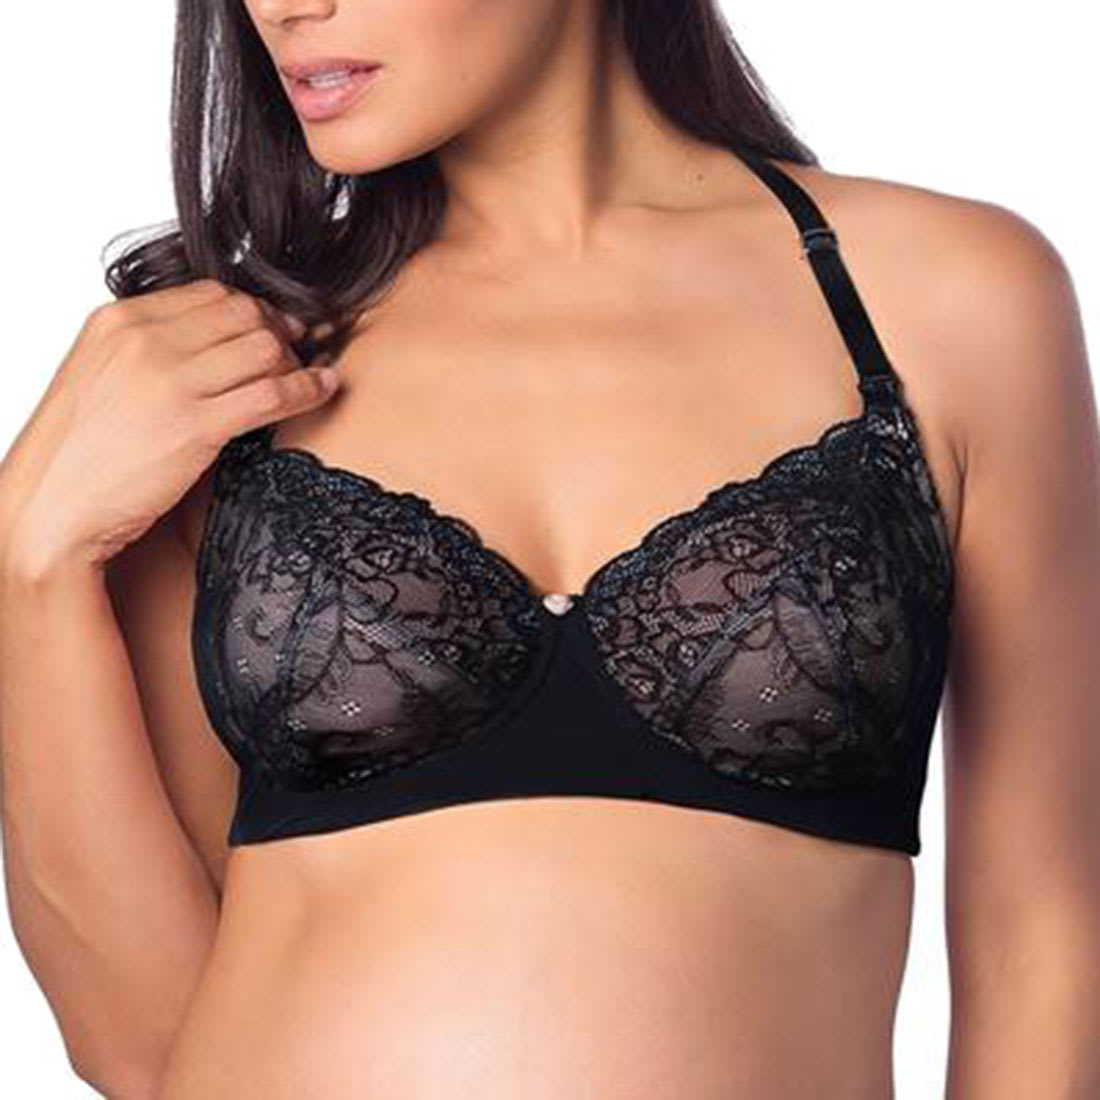 Find your right bra size the simple way – Hotmilk NZ